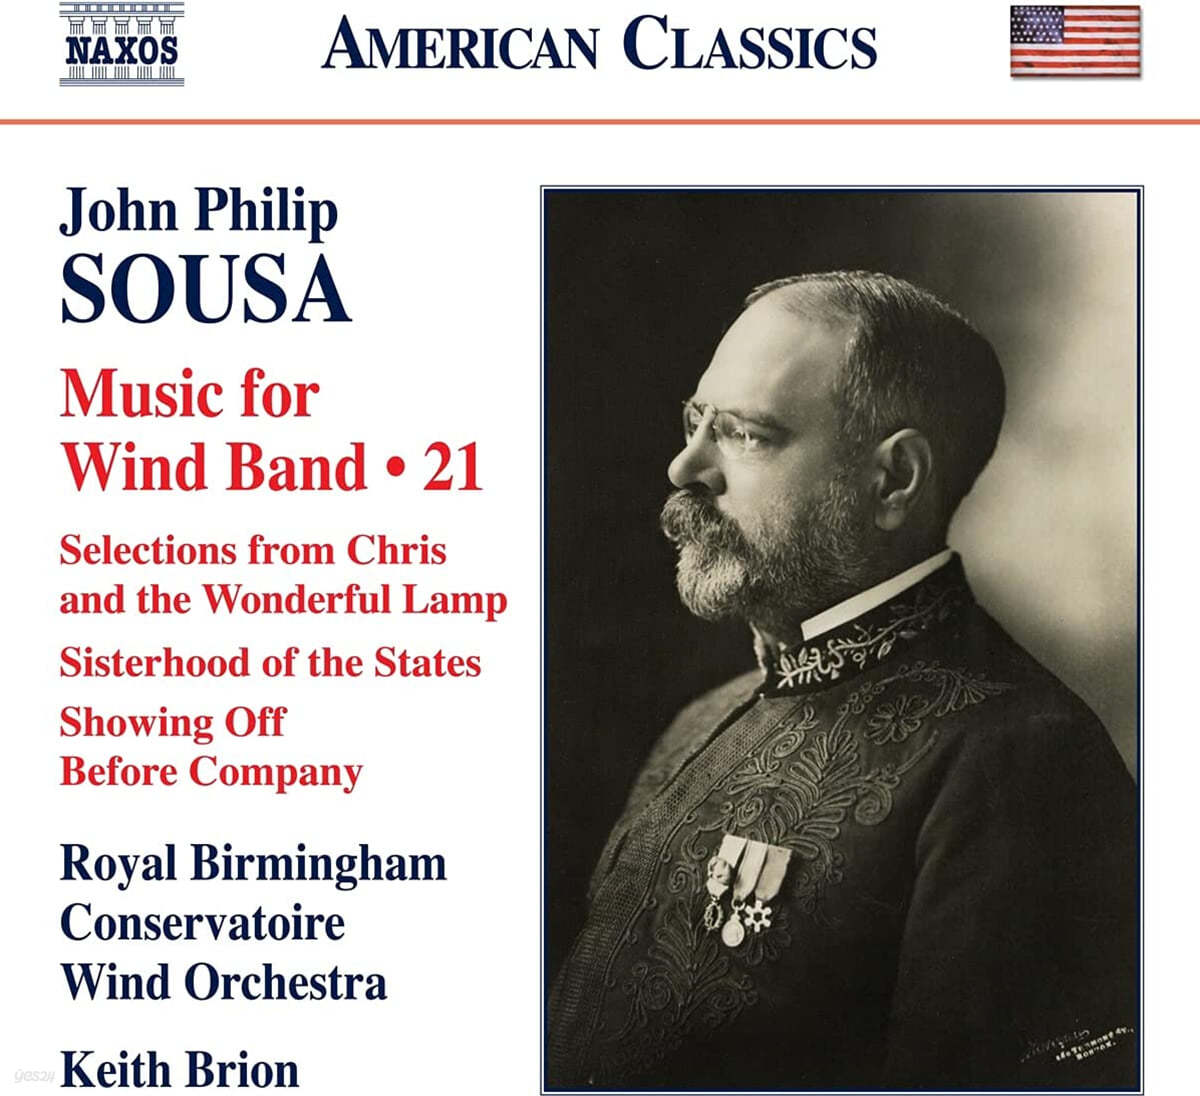 Royal Birmingham Conservatoire Wind Orchestra 존 필립 수자: 관악 밴드를 위한 작품 21집 (John Philip Sousa: Music For Wind Band Music 21) 